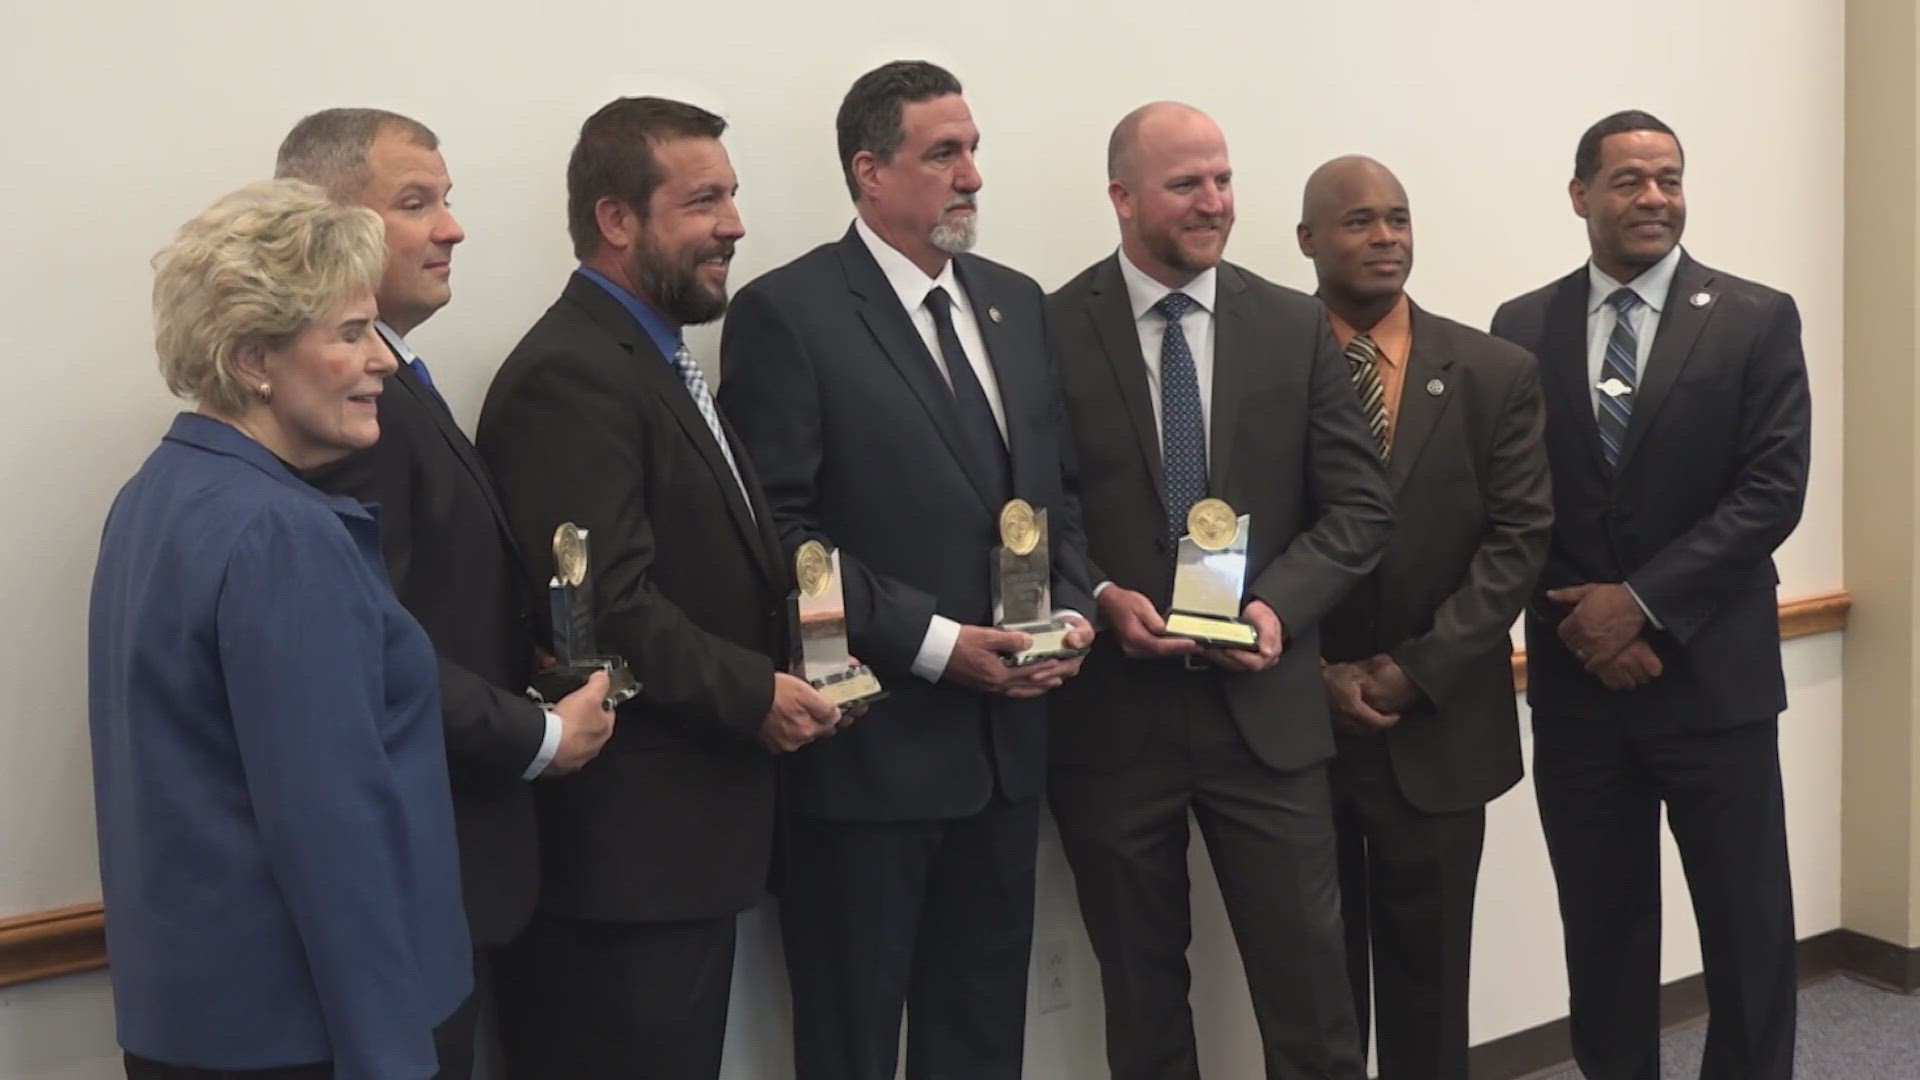 Four investigators received the Attorney General Award and the United States Marshal Director's Award for their work on the case.